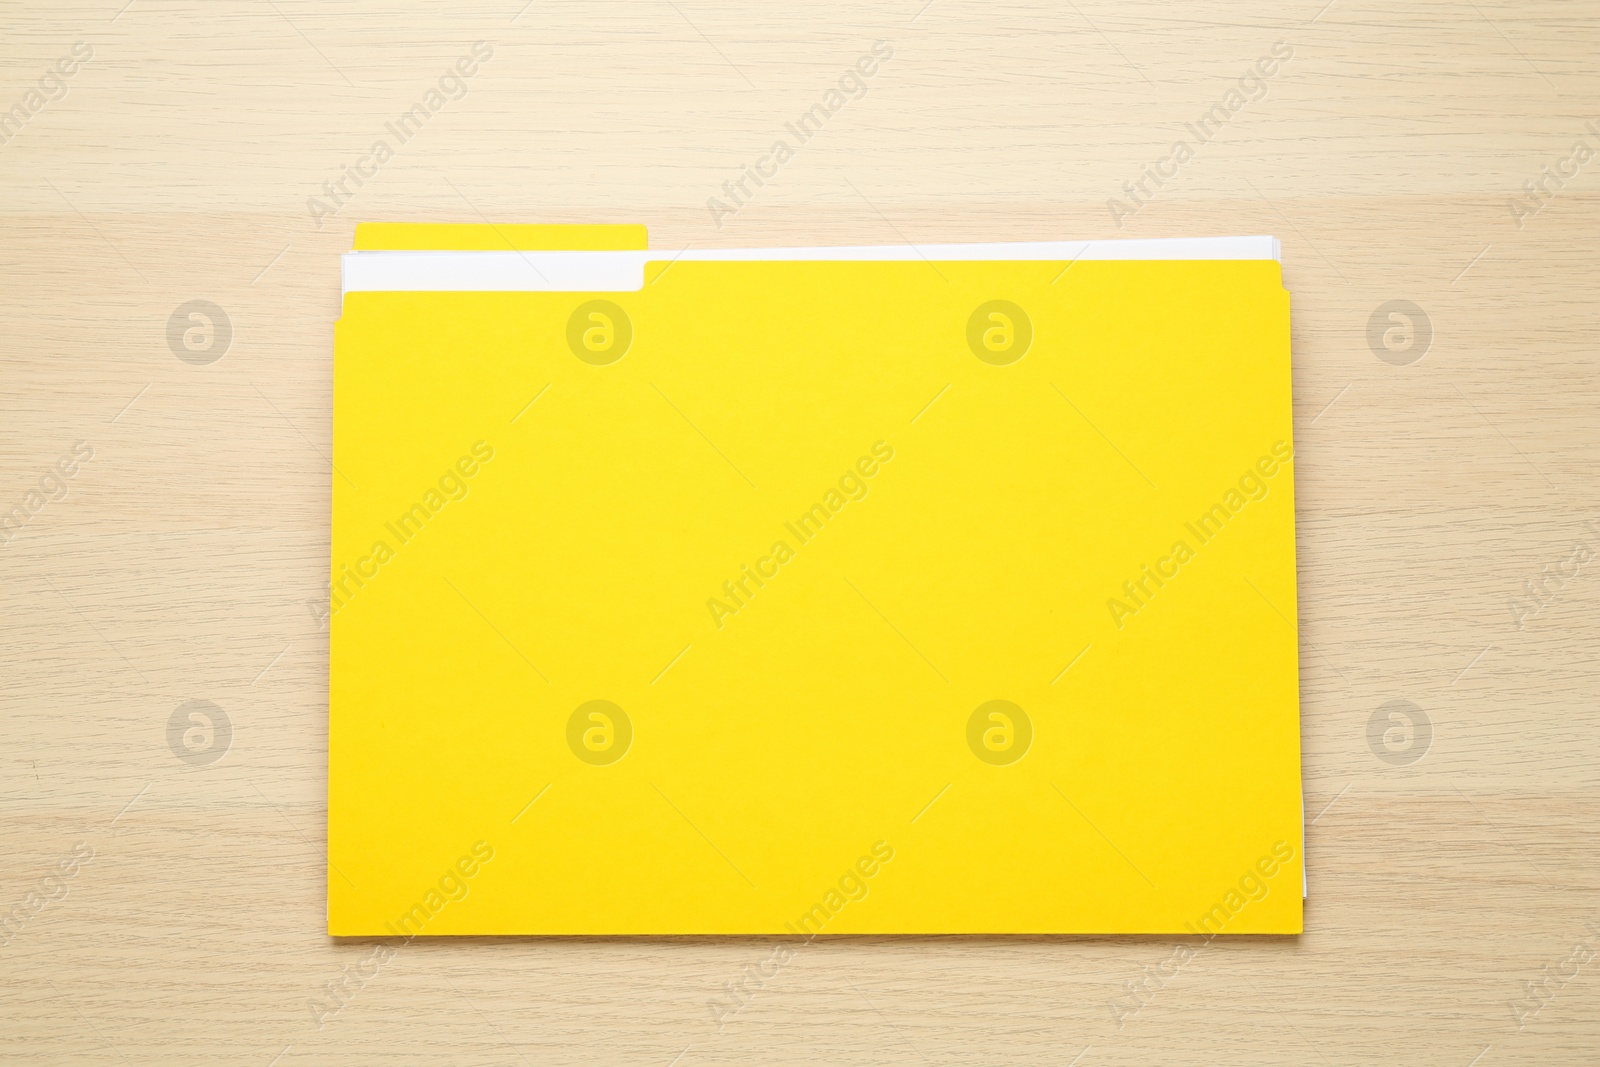 Photo of Yellow file with documents on wooden table, top view